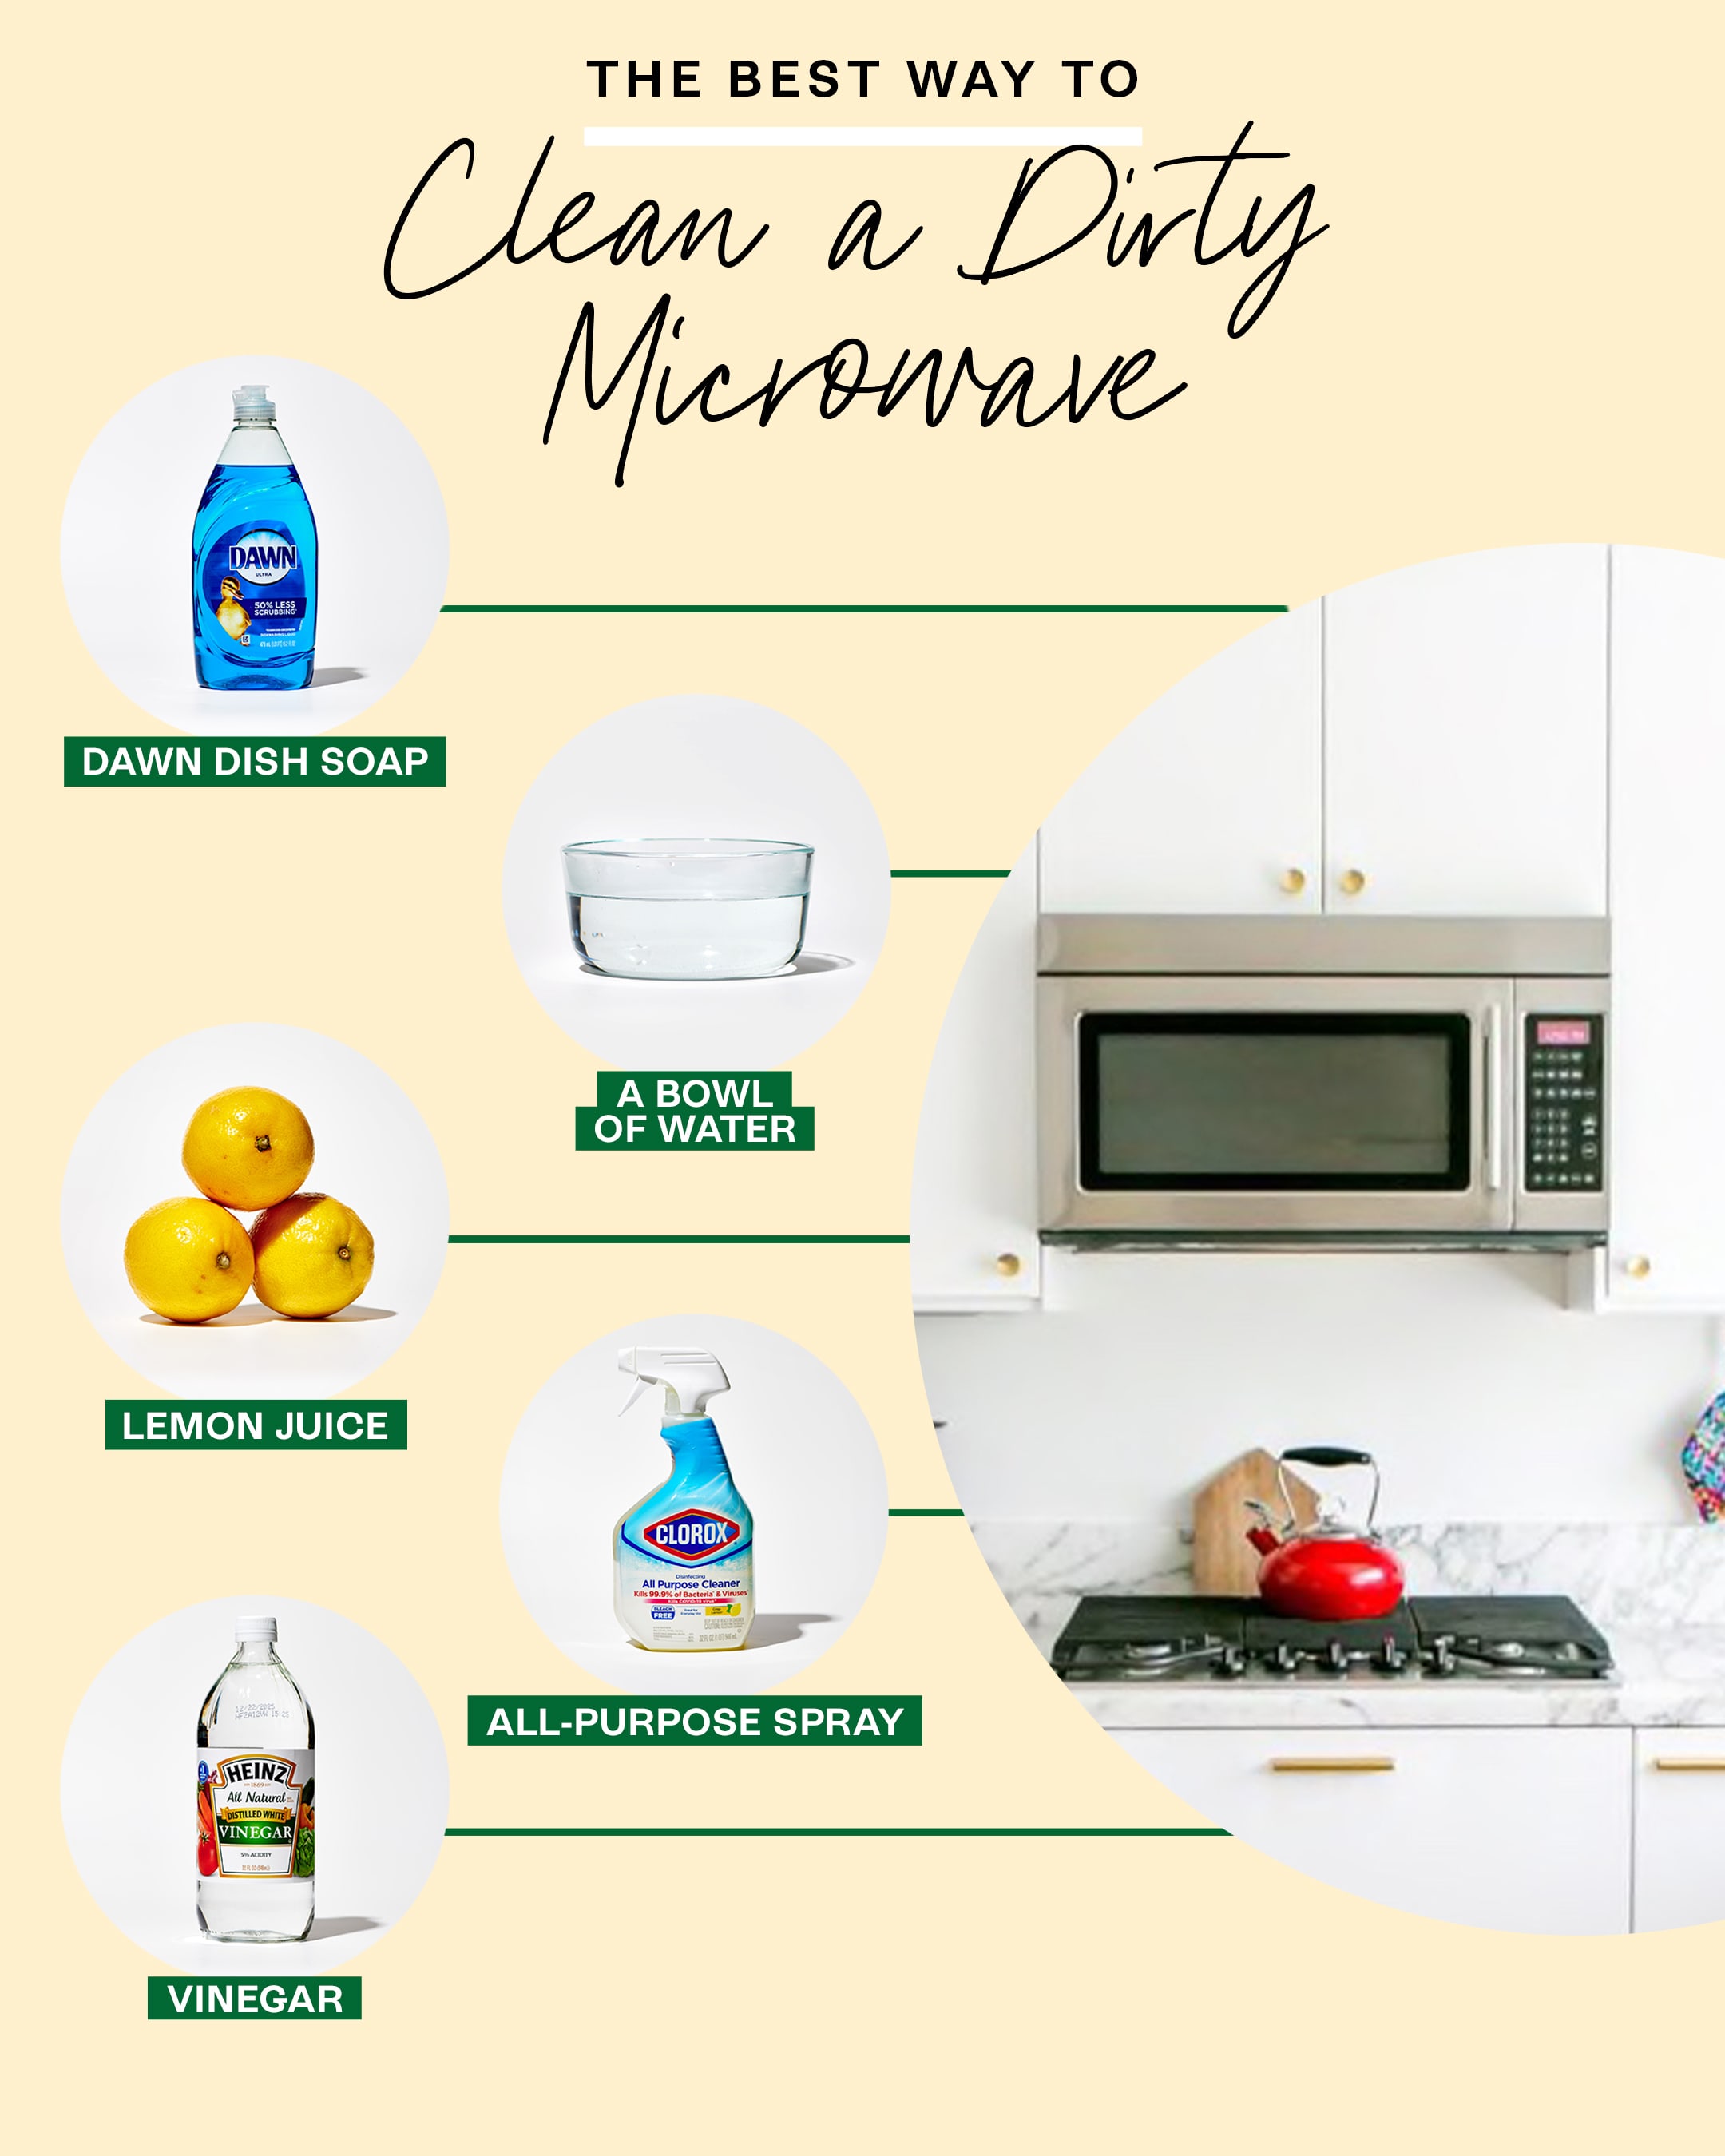 How To Clean A Microwave: 5 Tips To Keep Your Microwave Sparkling Clean